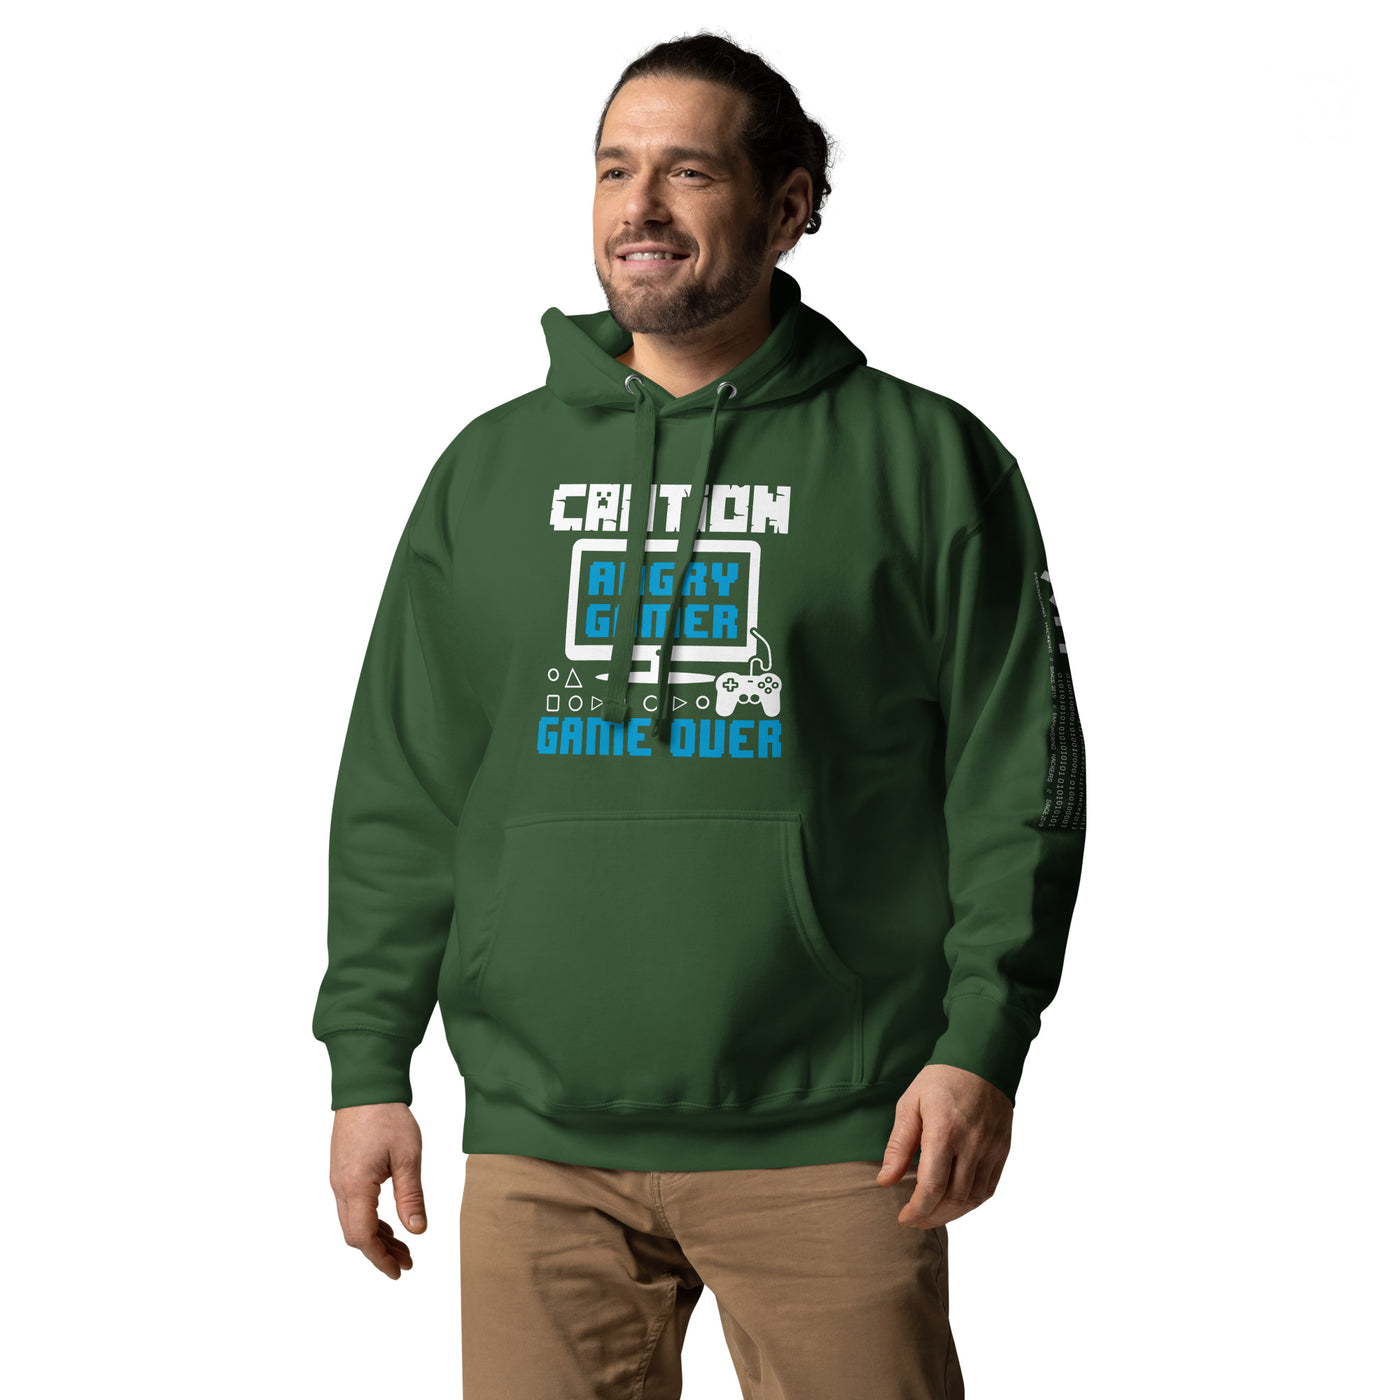 Caution! Angry Gamer Unisex Hoodie